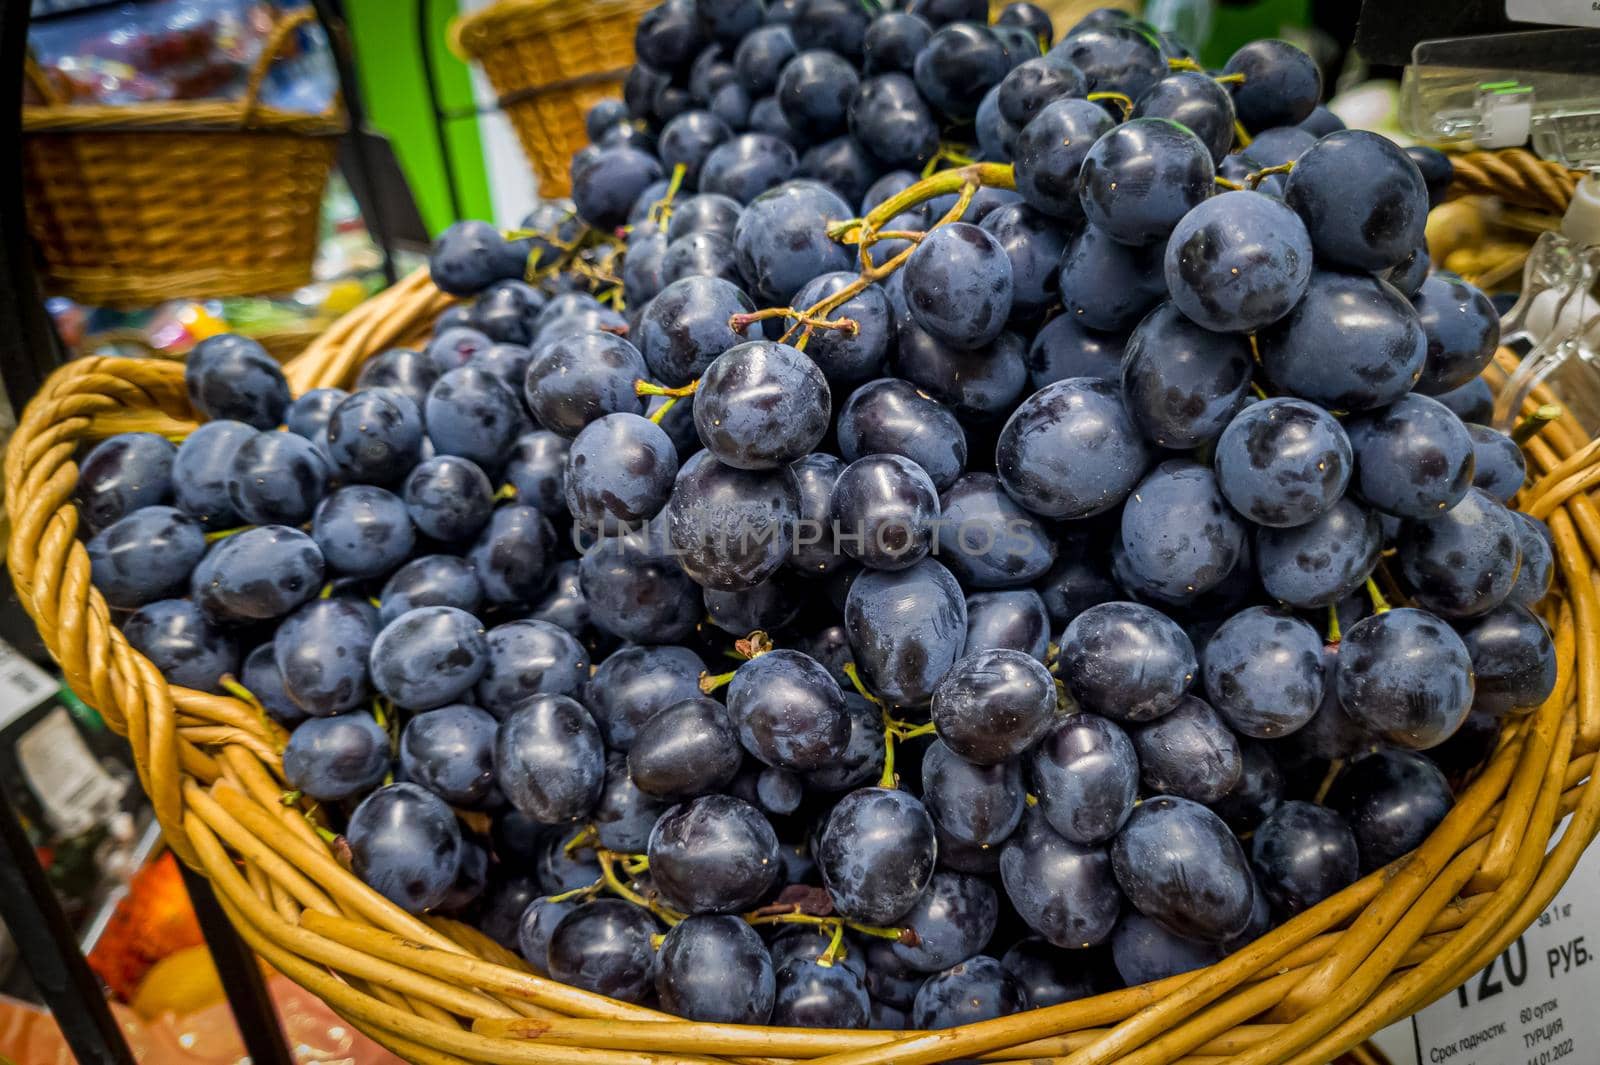 Bunches of blue grapes are in a basket in the store. by Milanchikov